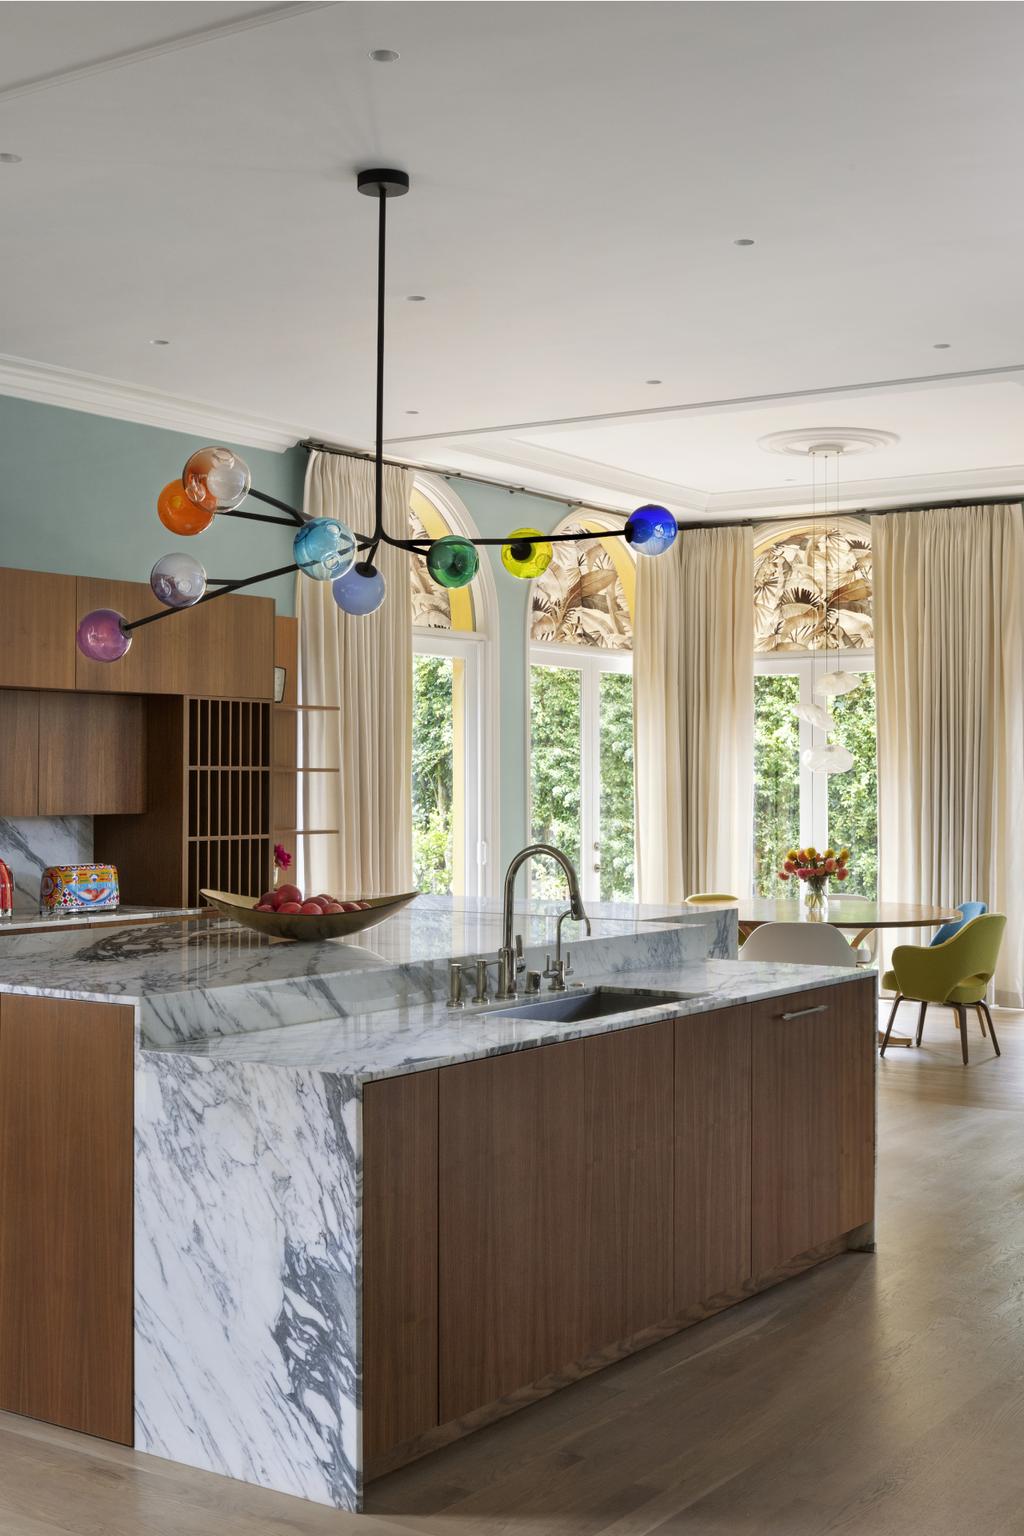 kitchen featuring a suspension lamp with delicately crafted glass spheres in a kaleidoscope of vivid hues